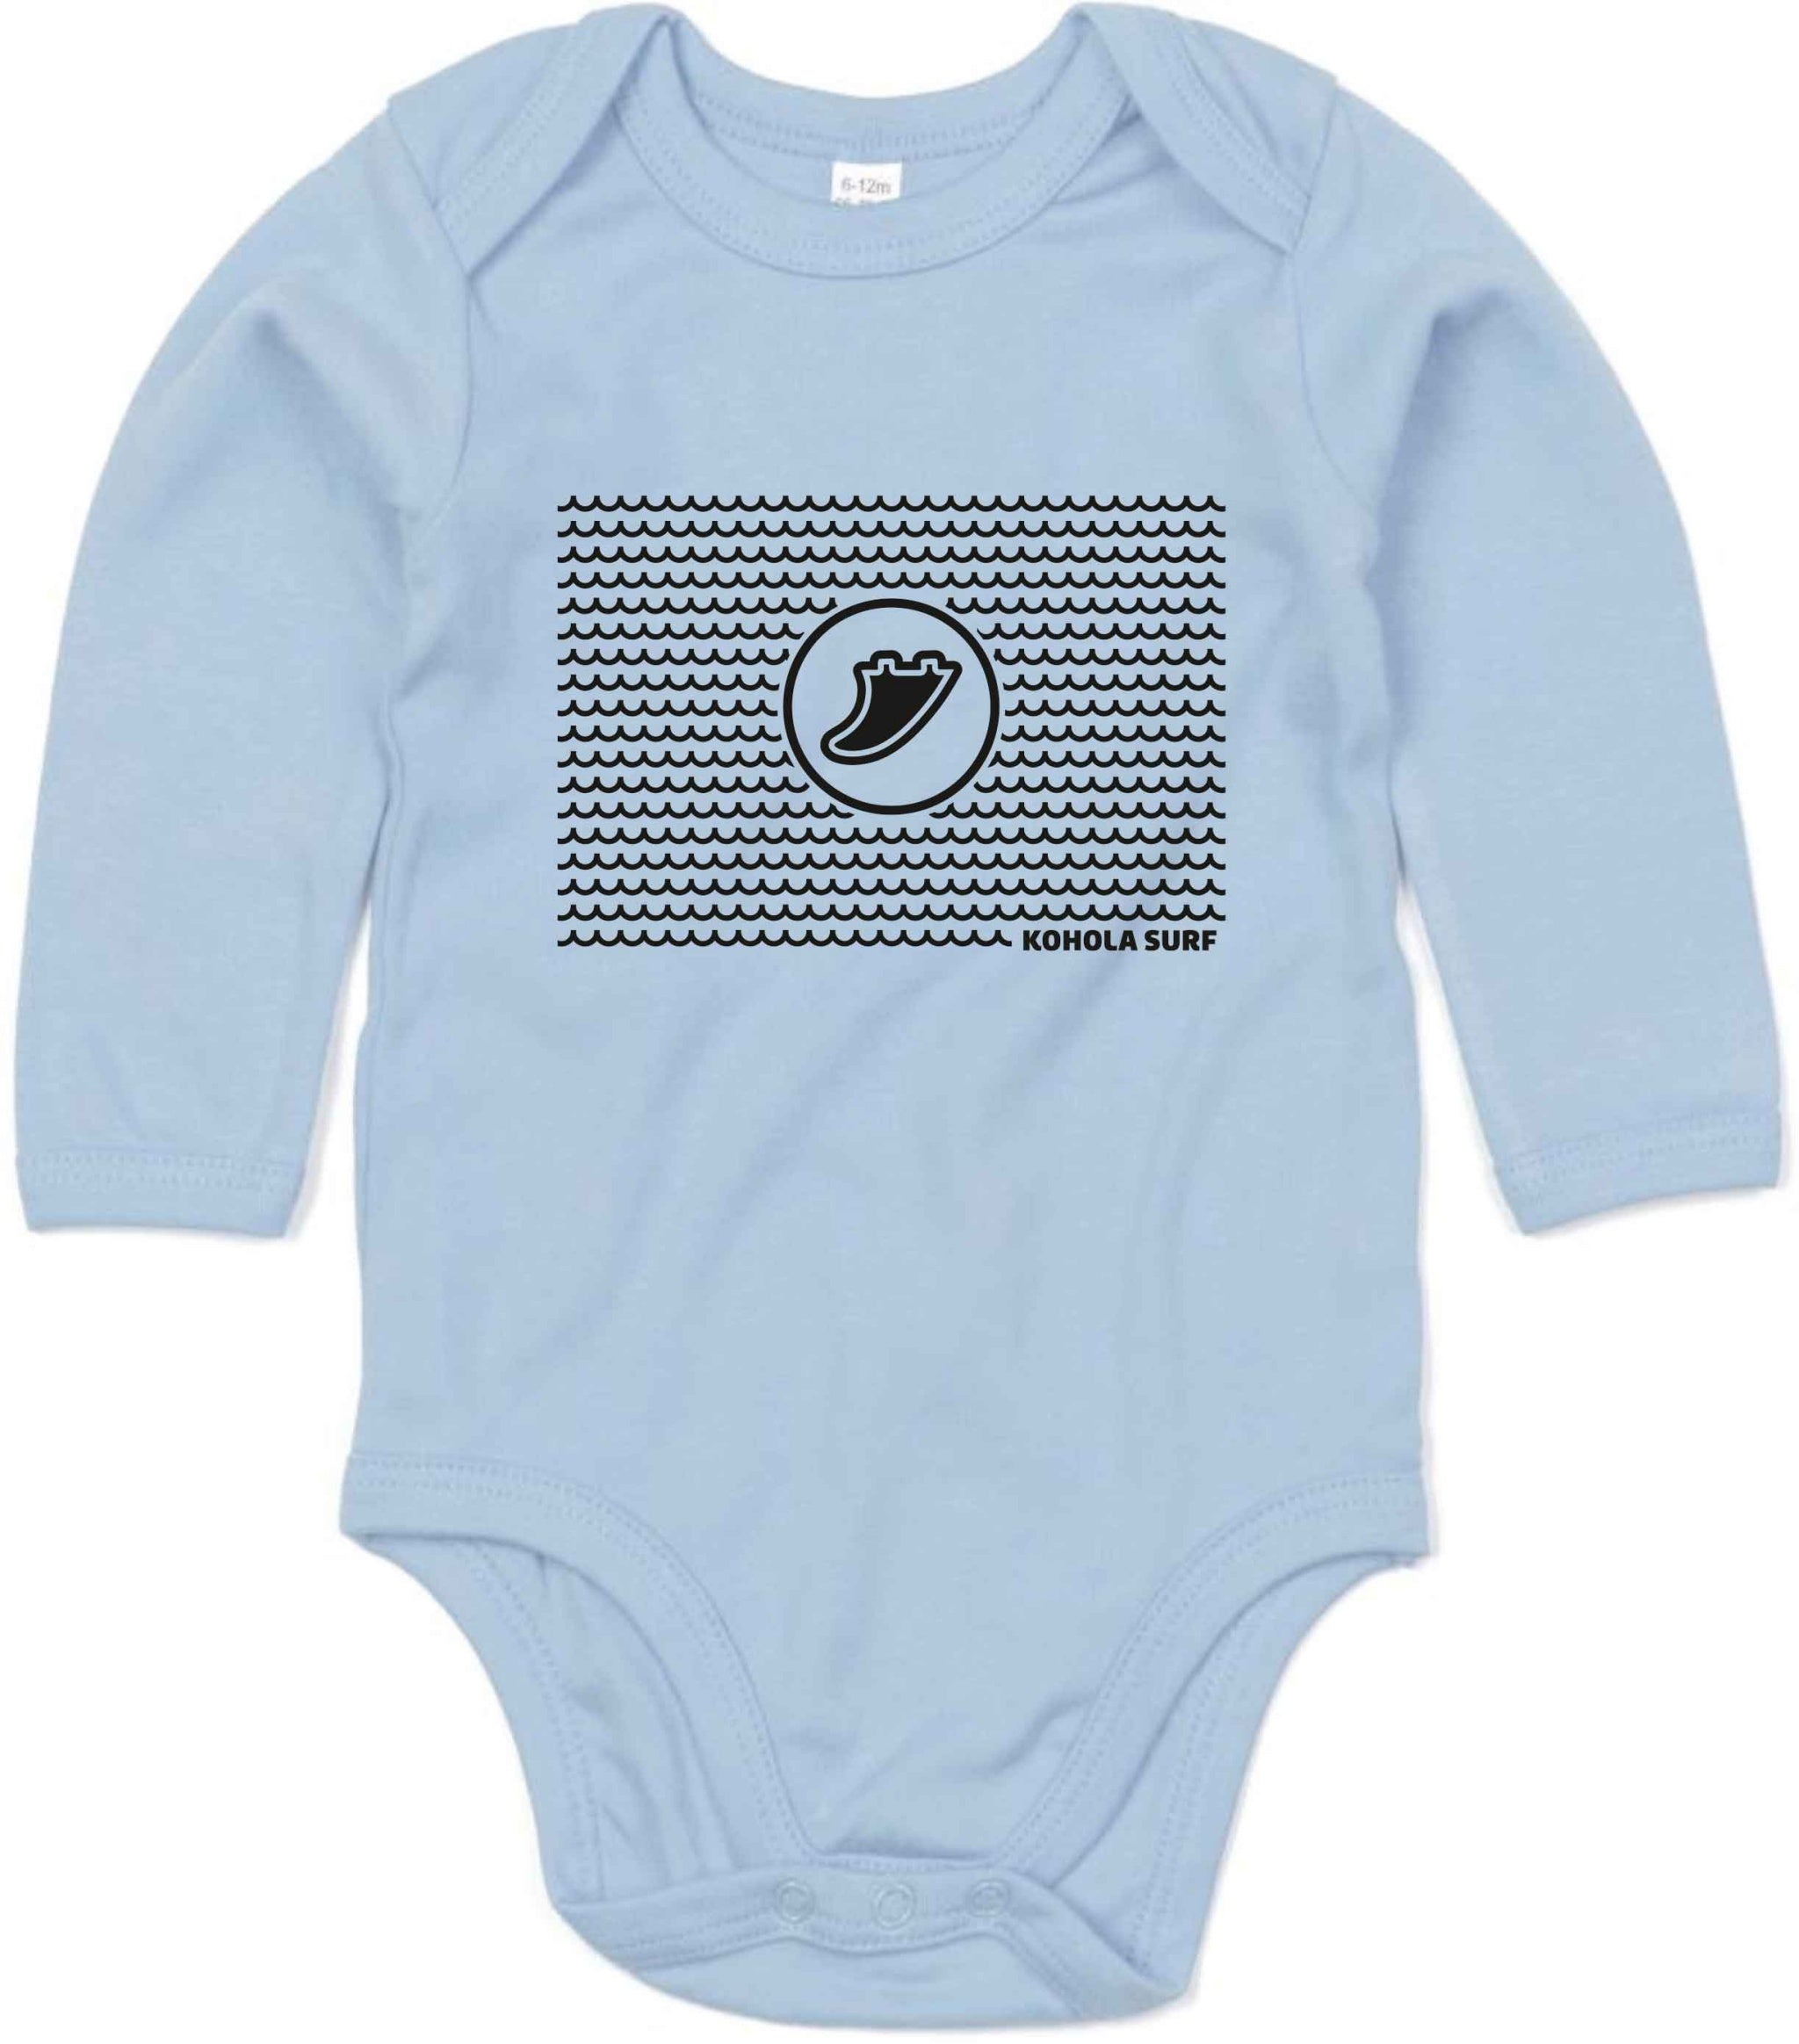 Endless Wave Baby Long-Sleeved Body